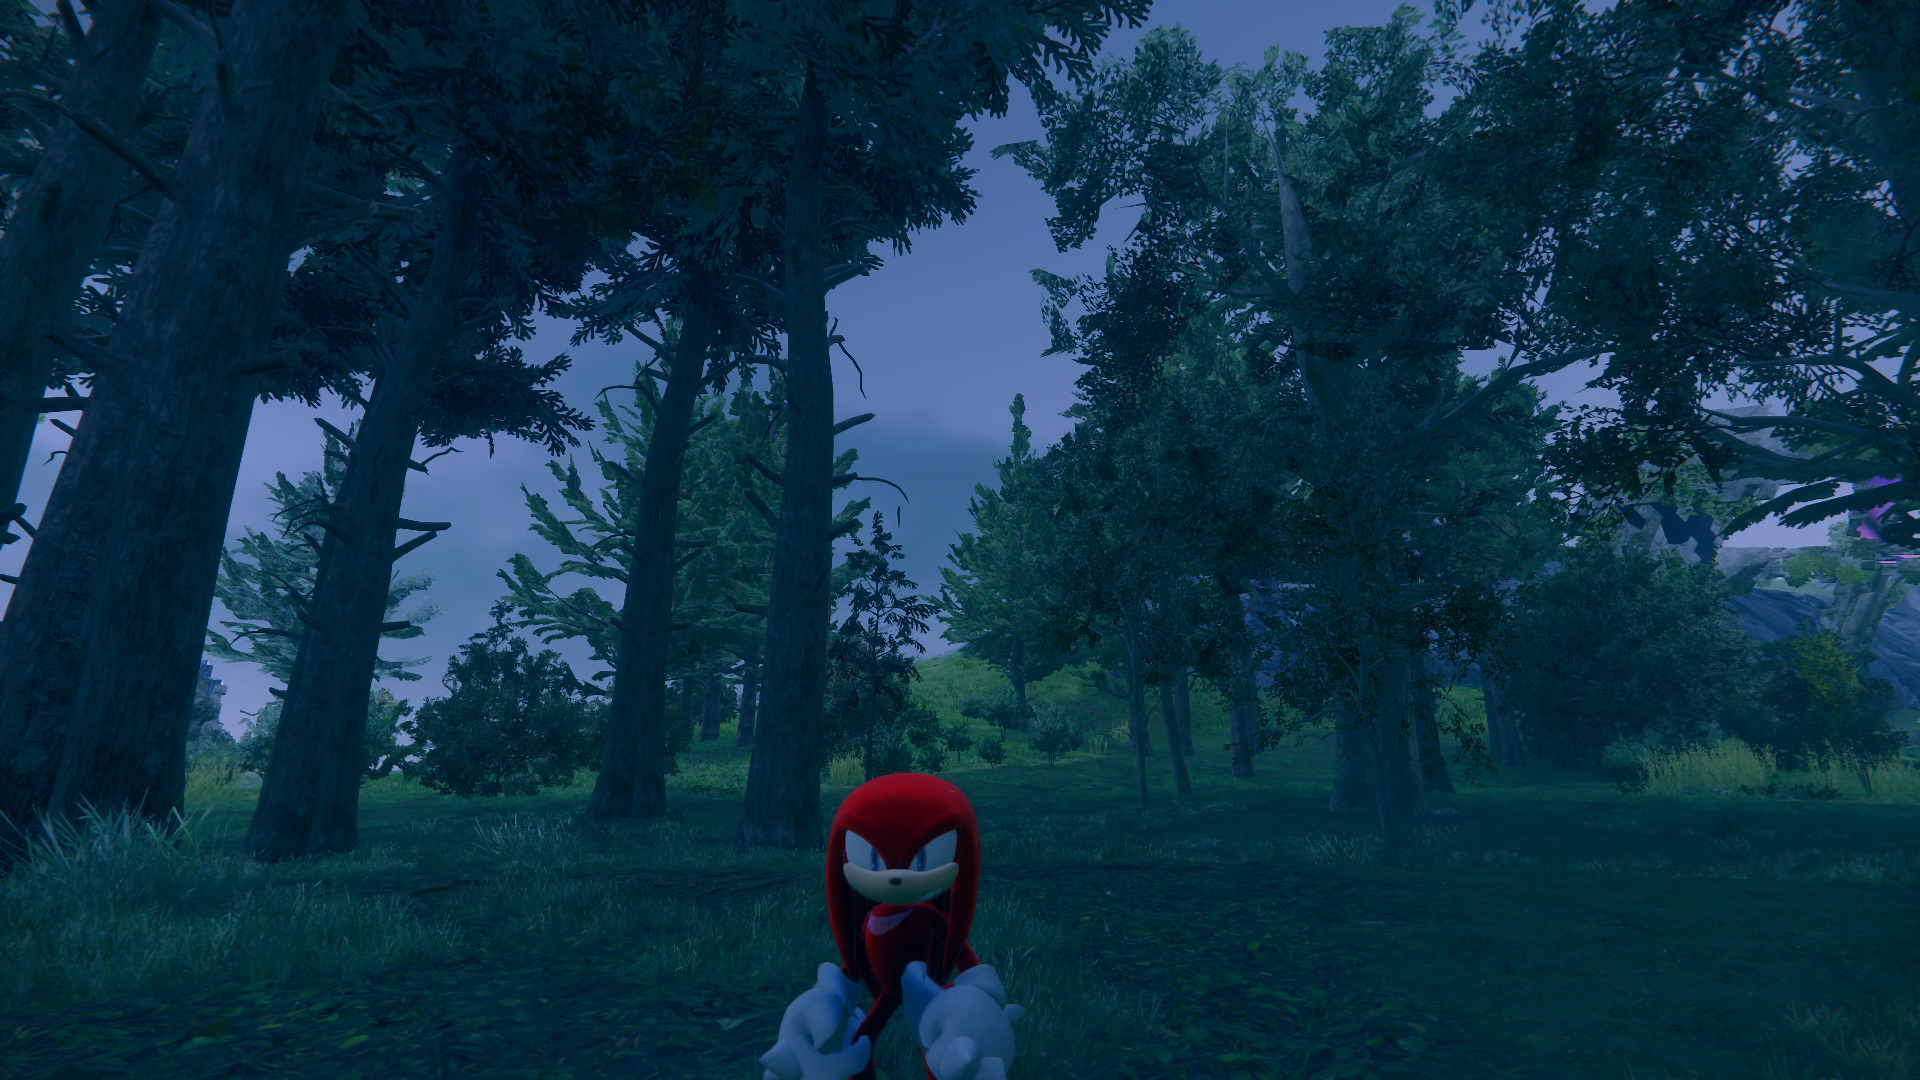 Image 5 - Knuckles the Echidna mod for Sonic Frontiers - ModDB